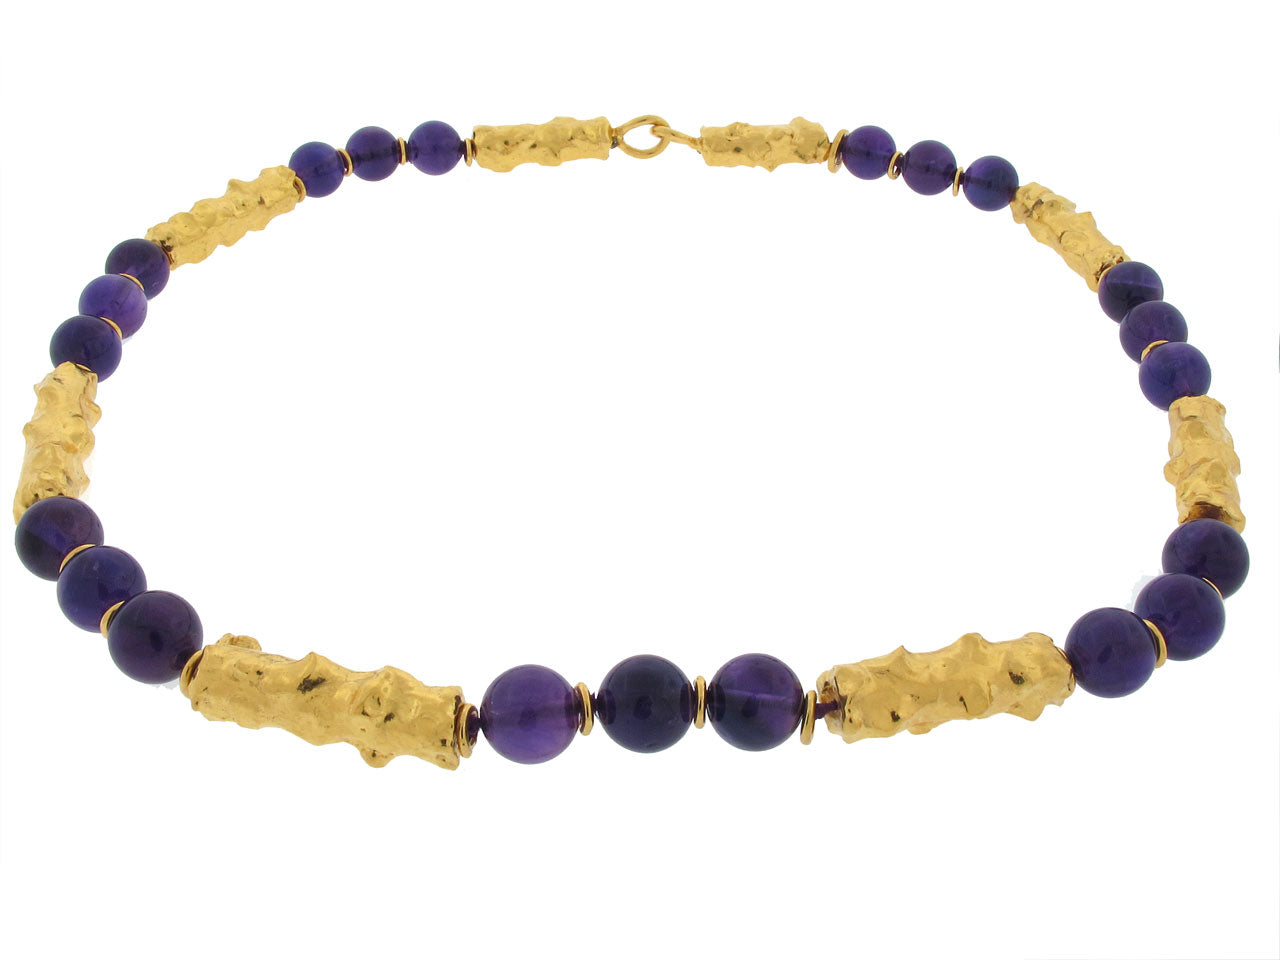 Jean Mahie Amethyst Bead Necklace in 22K Gold